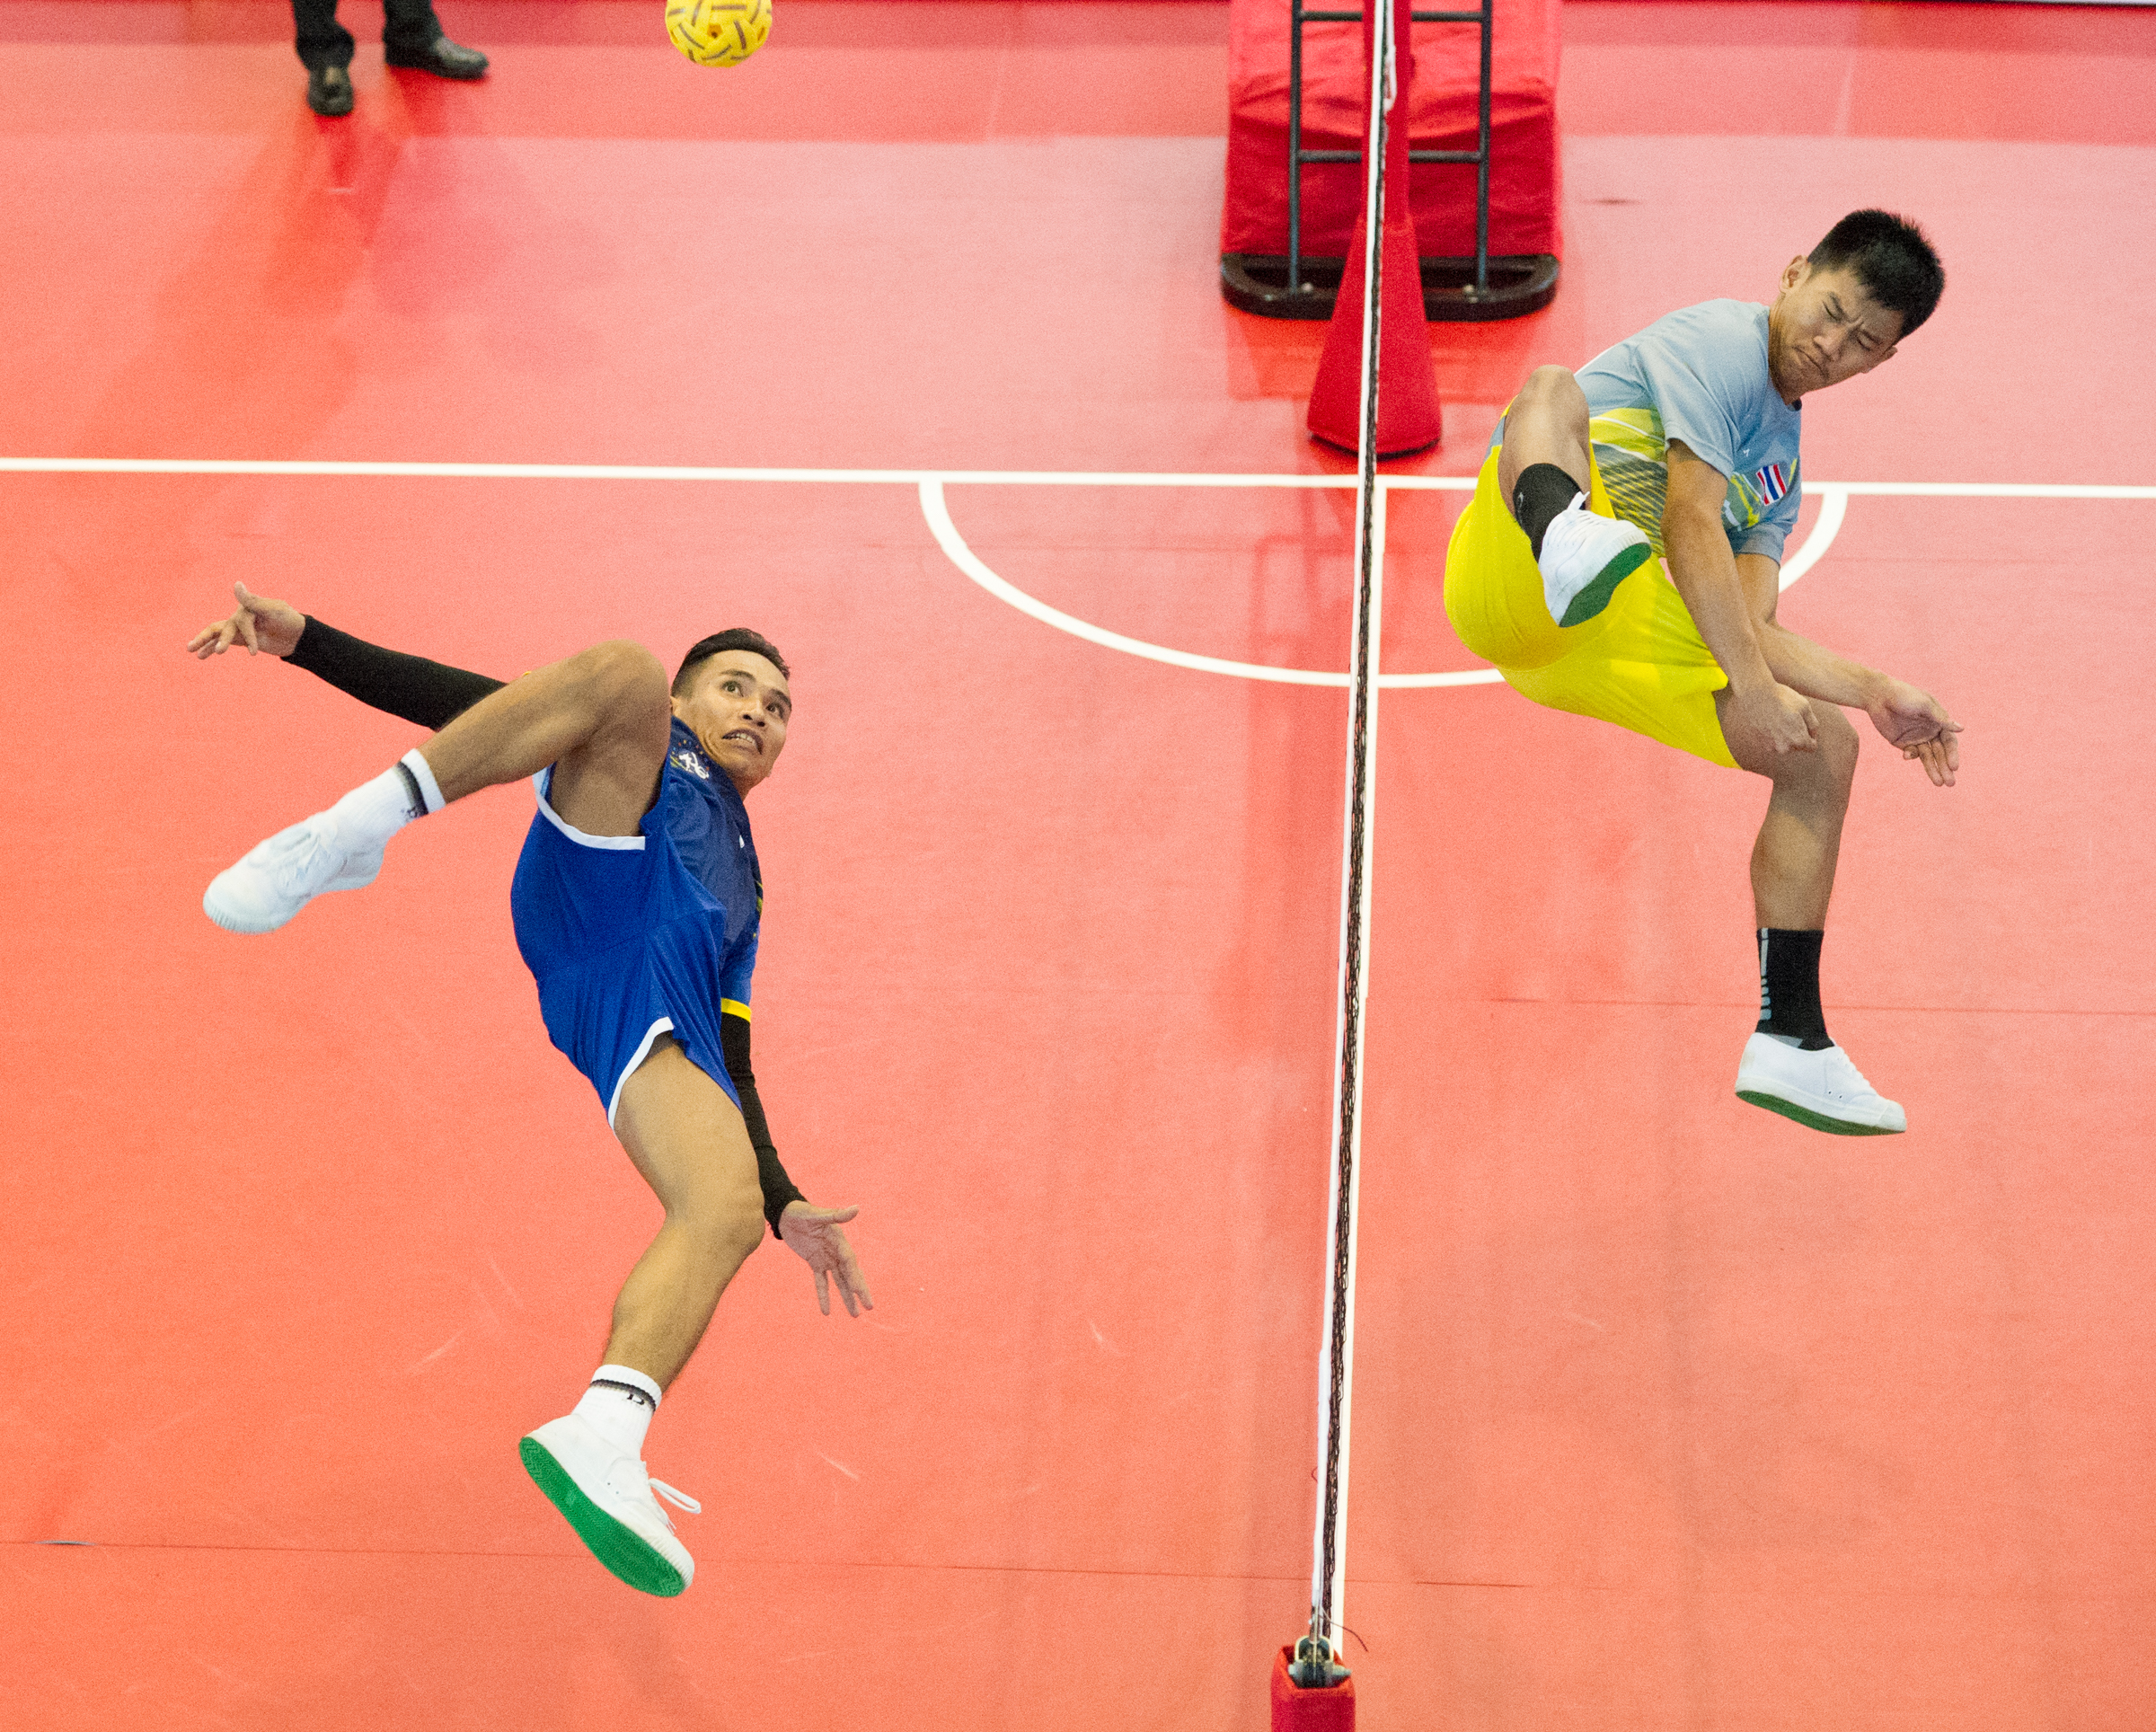 A Laotian player prepares to spike during the sepak takraw competition of the ASEAN University Games at the Bedok Sports Hall.